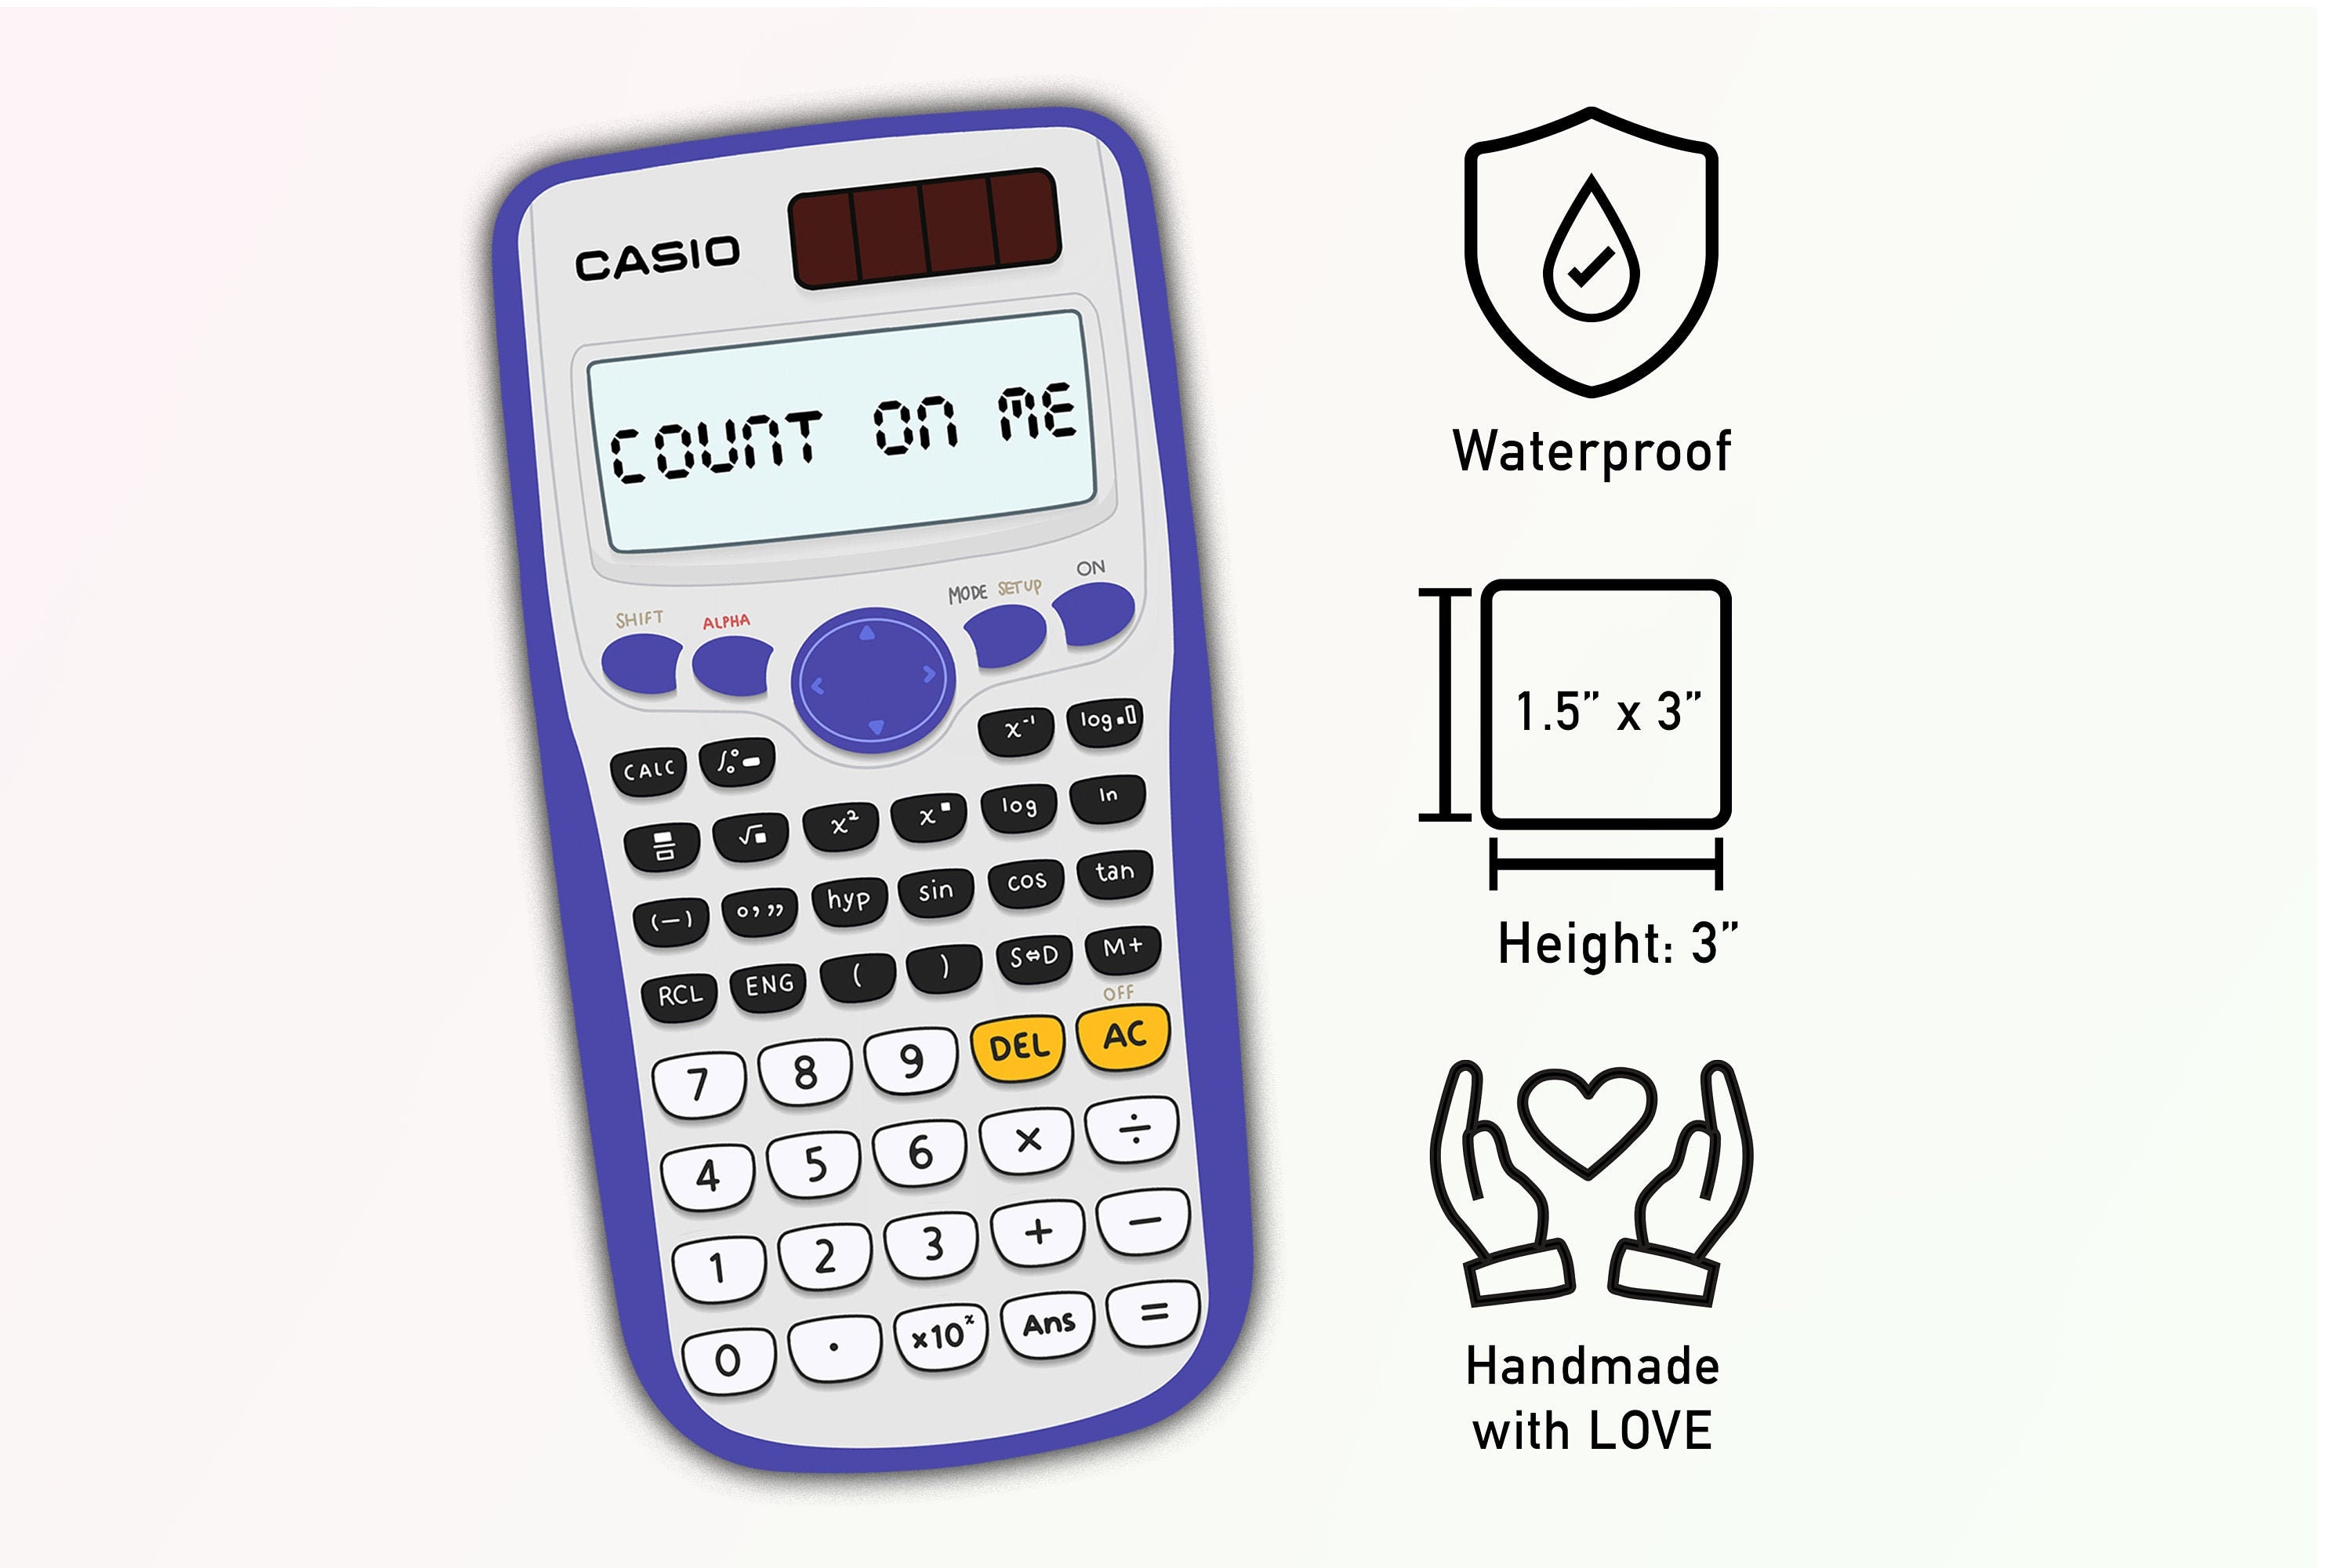 Count on me scientific calculator meme sticker cute and Etsy